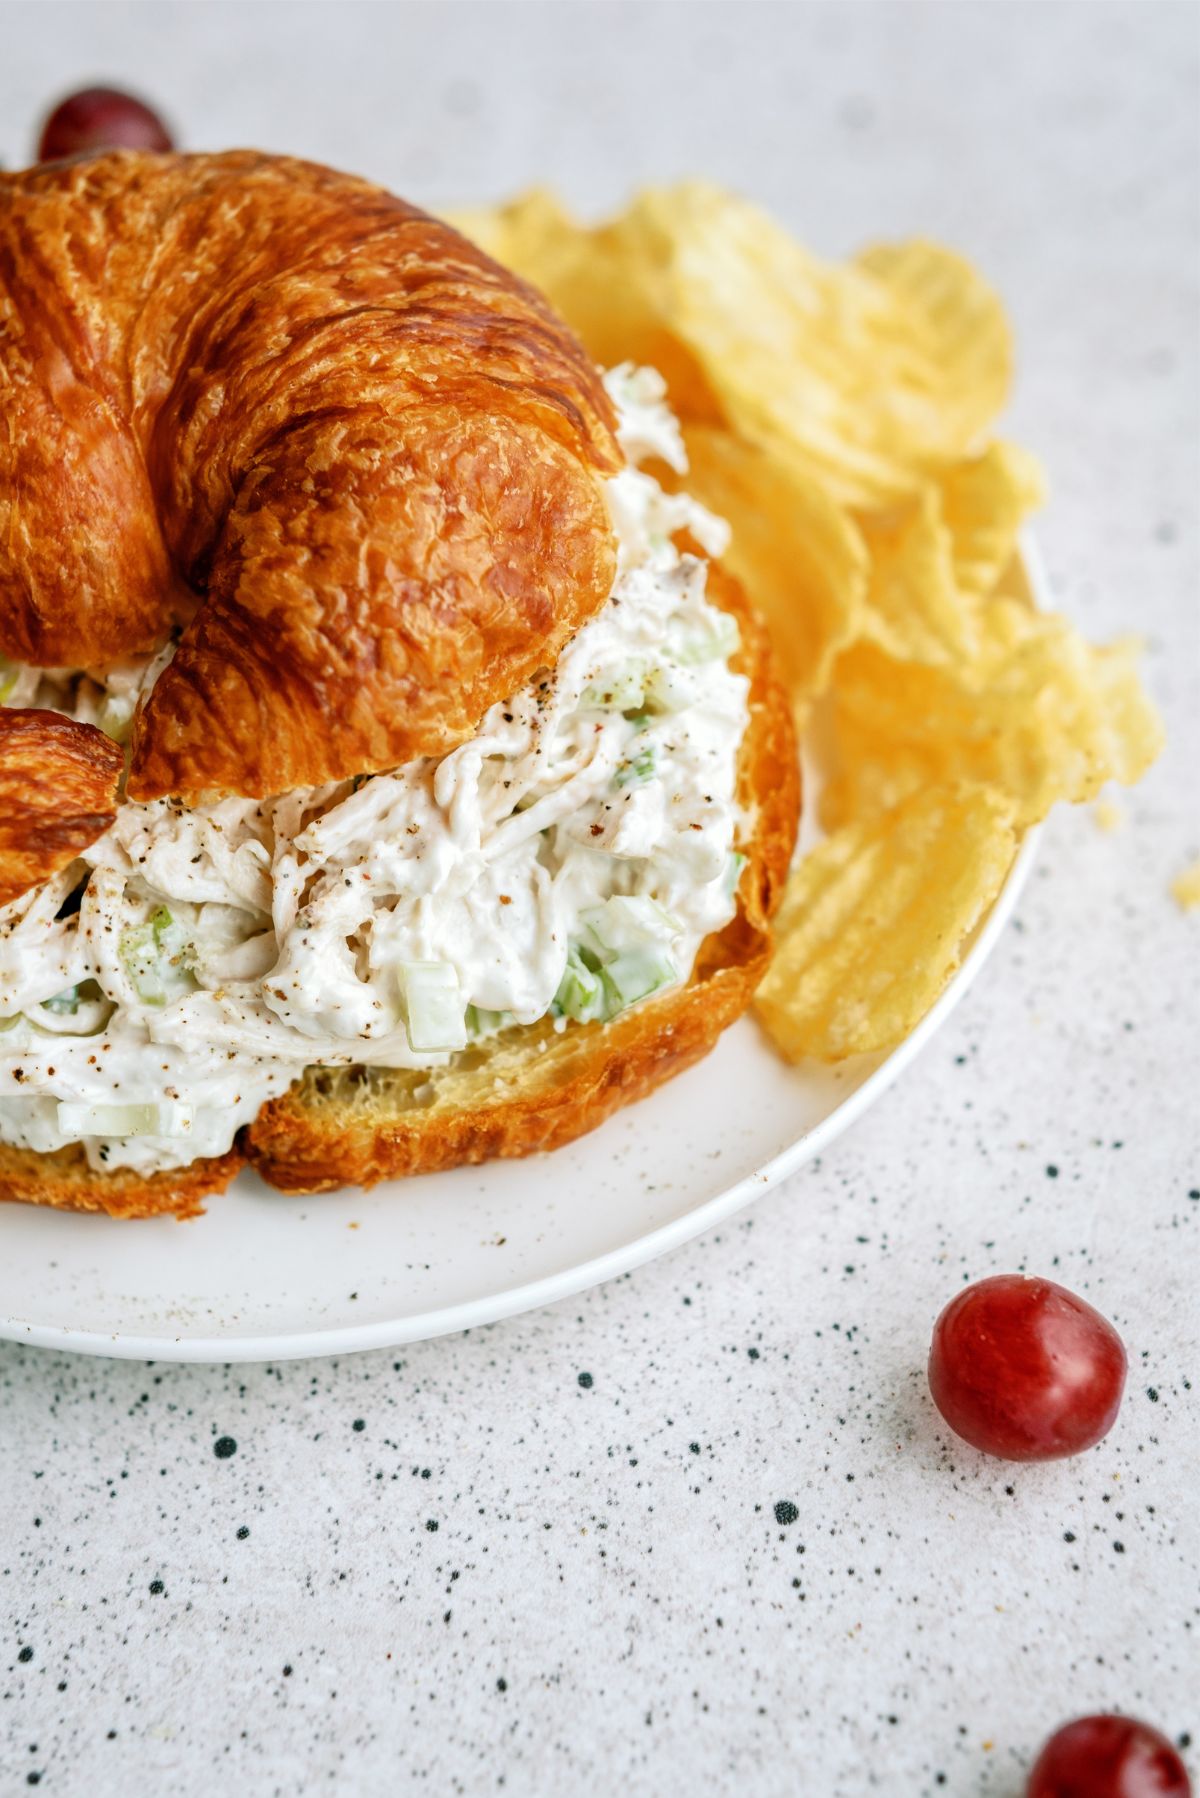 Kneaders Copycat Chicken Salad on a croissant bun with side of chips